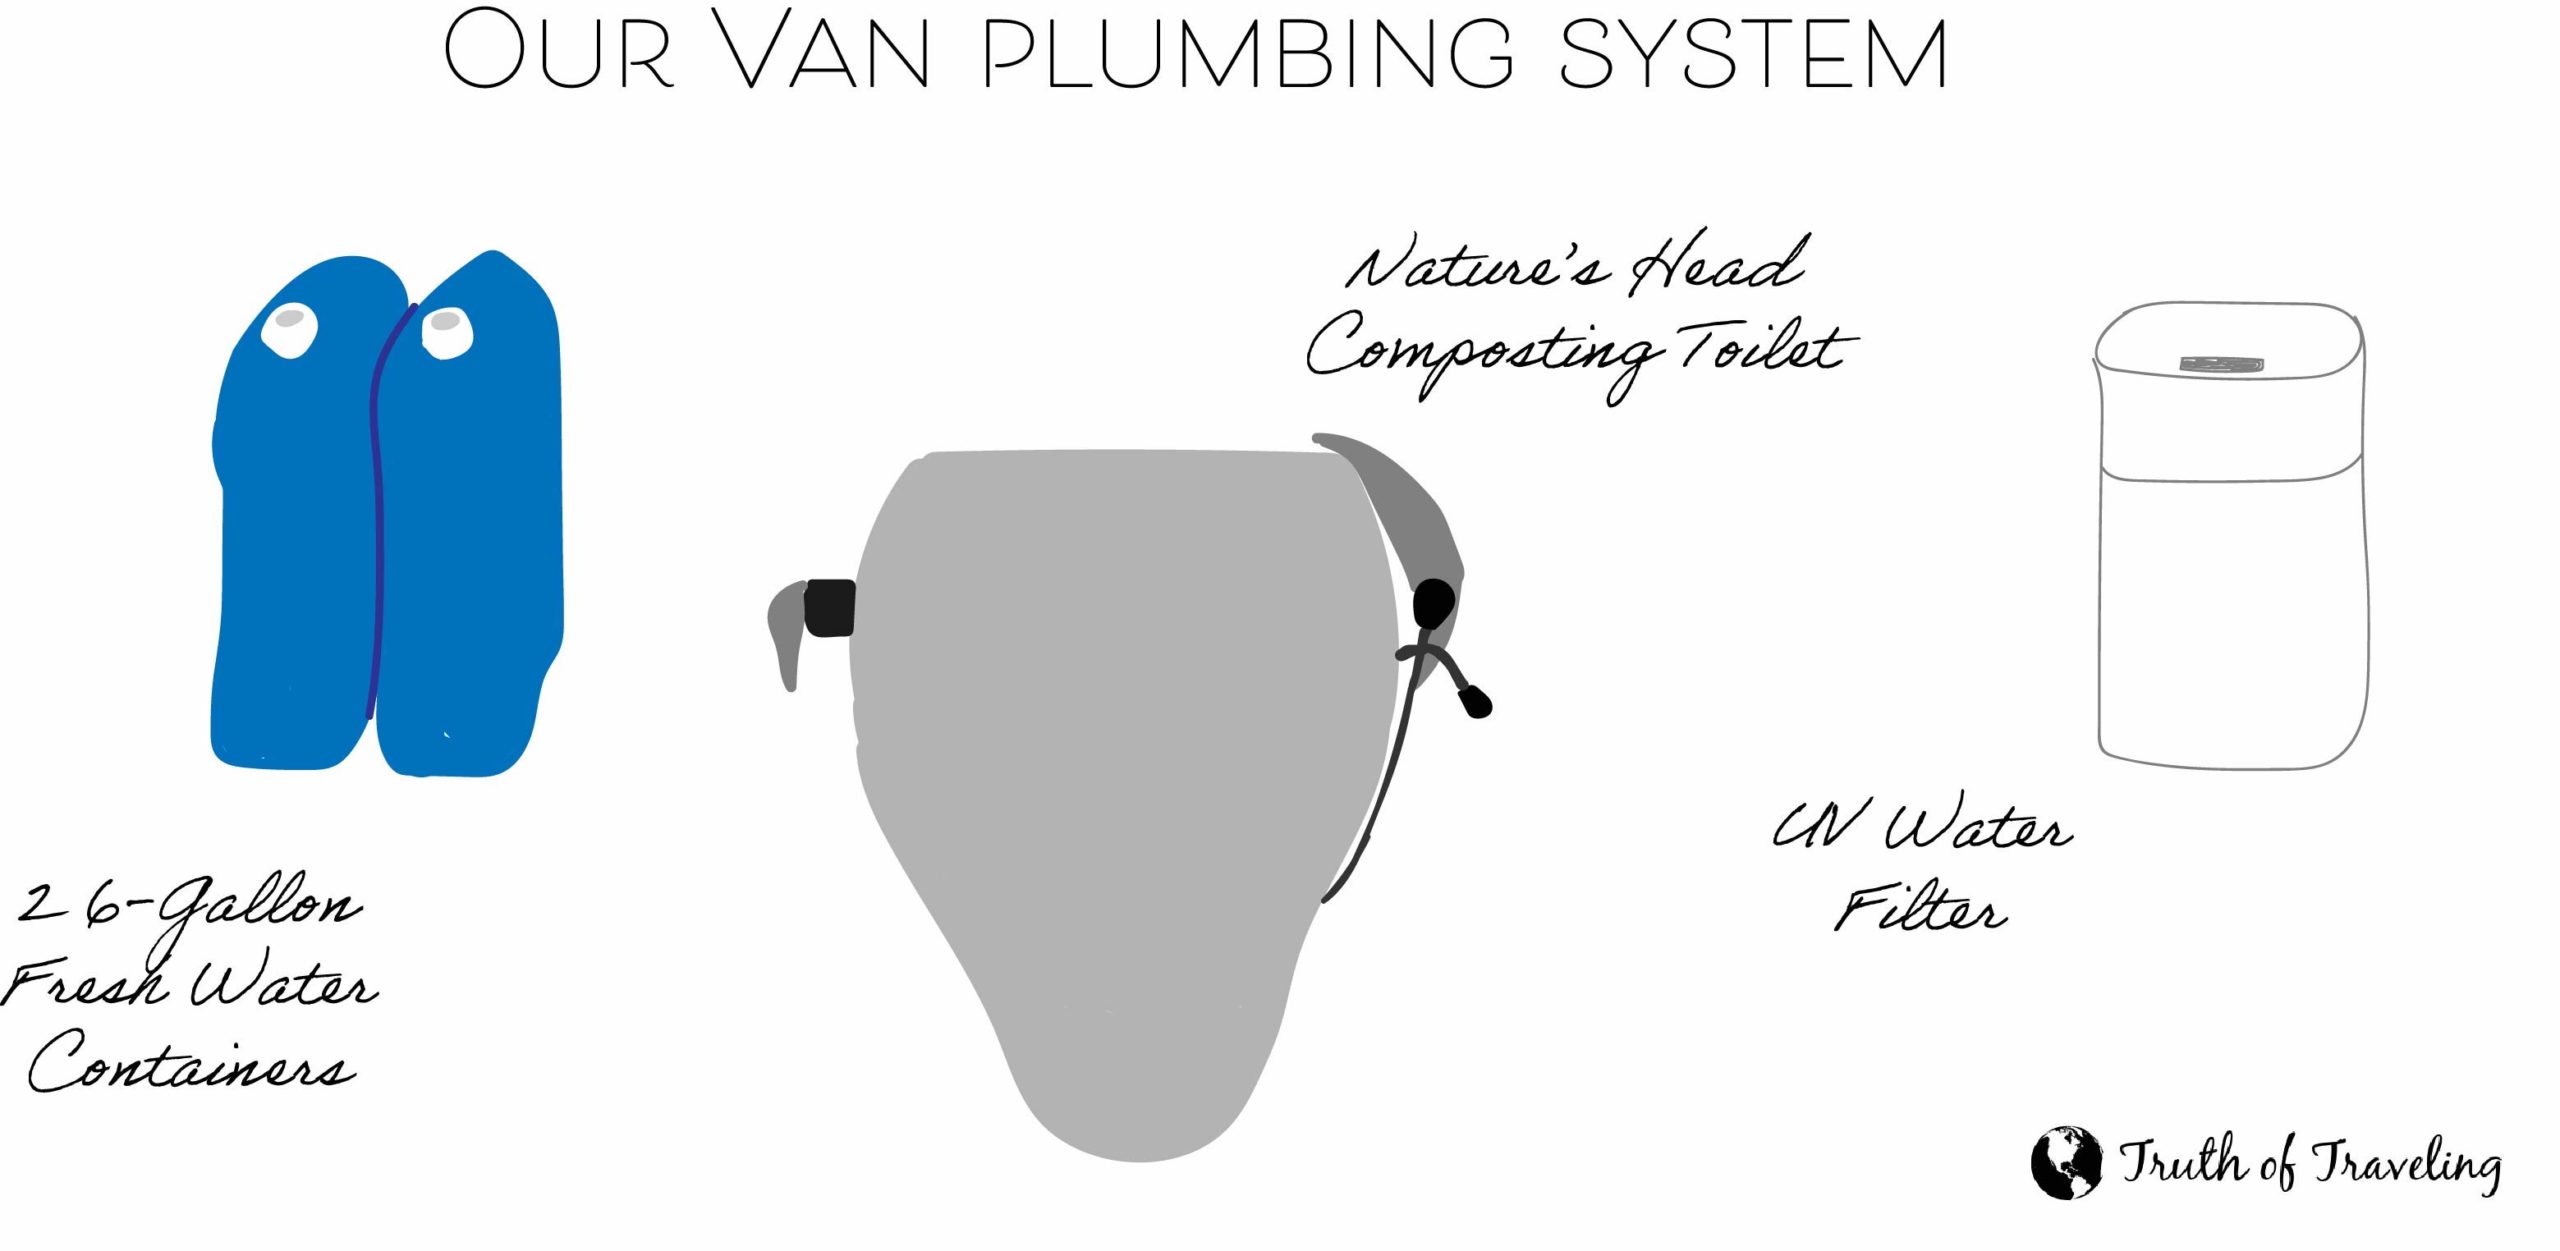 Our van plumbing system- 2 6-gallon fresh water containers, Nature's Head composting toilet, UV water filter